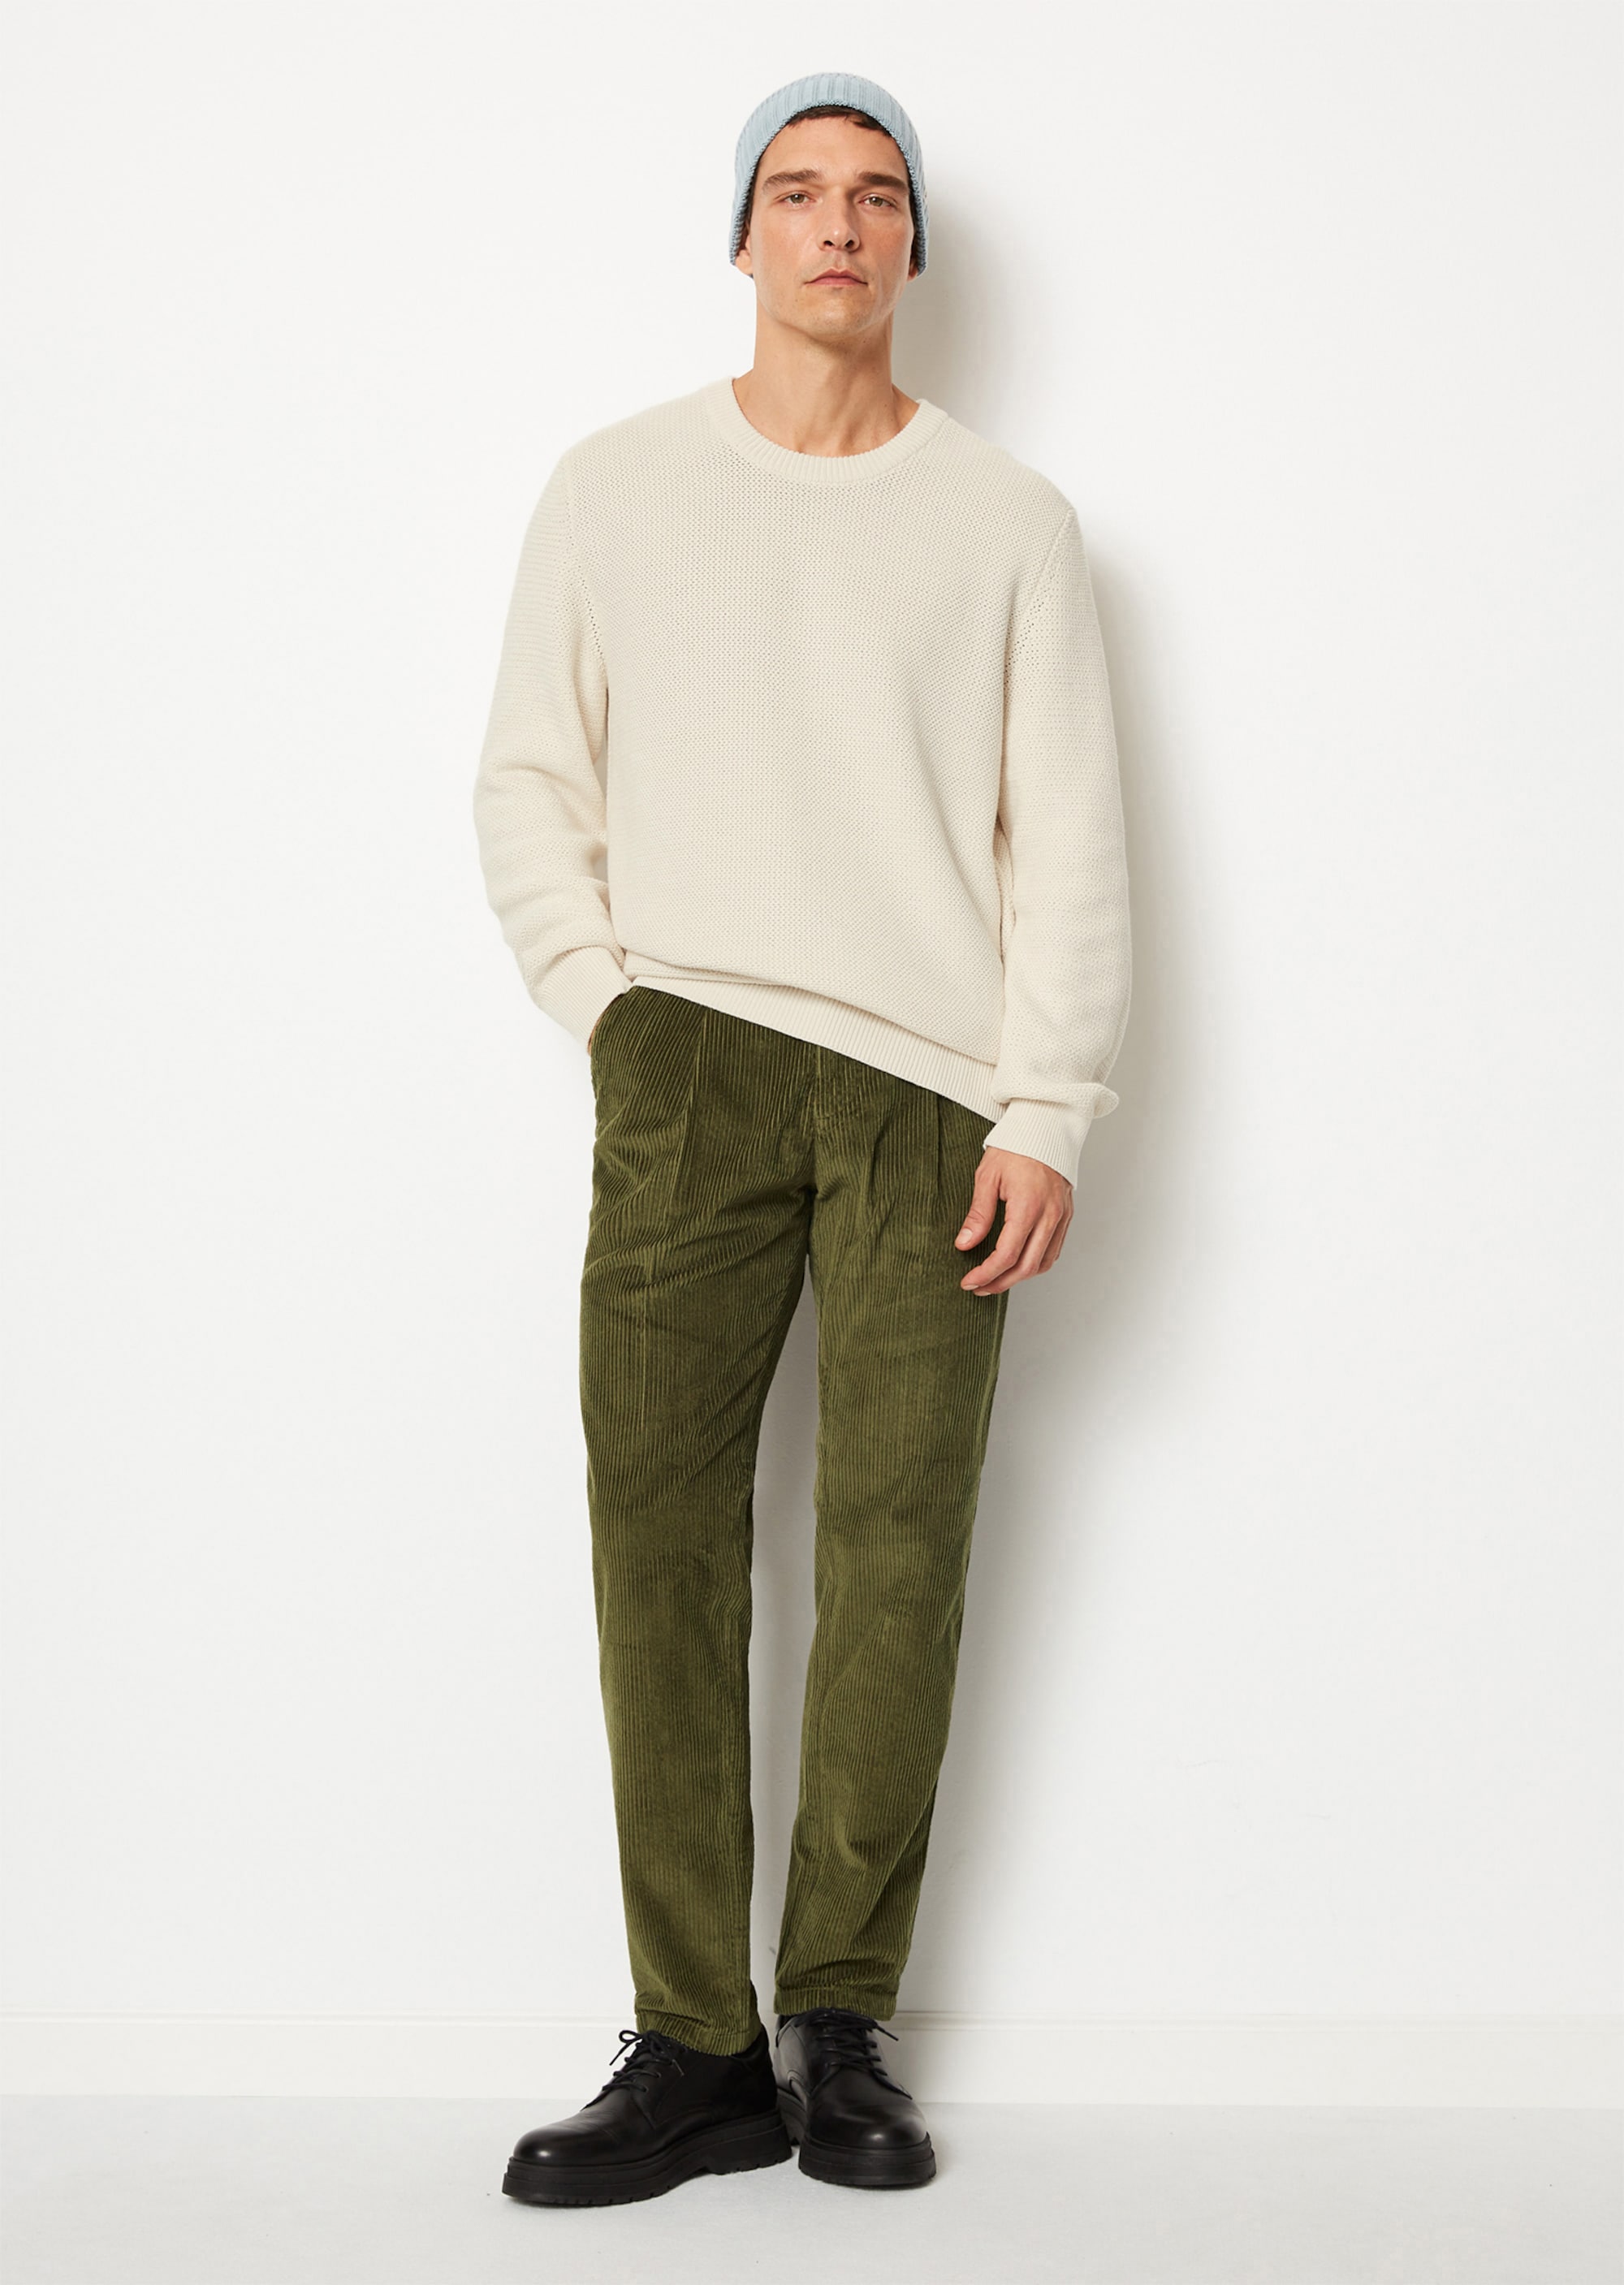 Corduroy pants model OSBY jogger tapered Made of pure organic cotton - green, Corduroy trousers